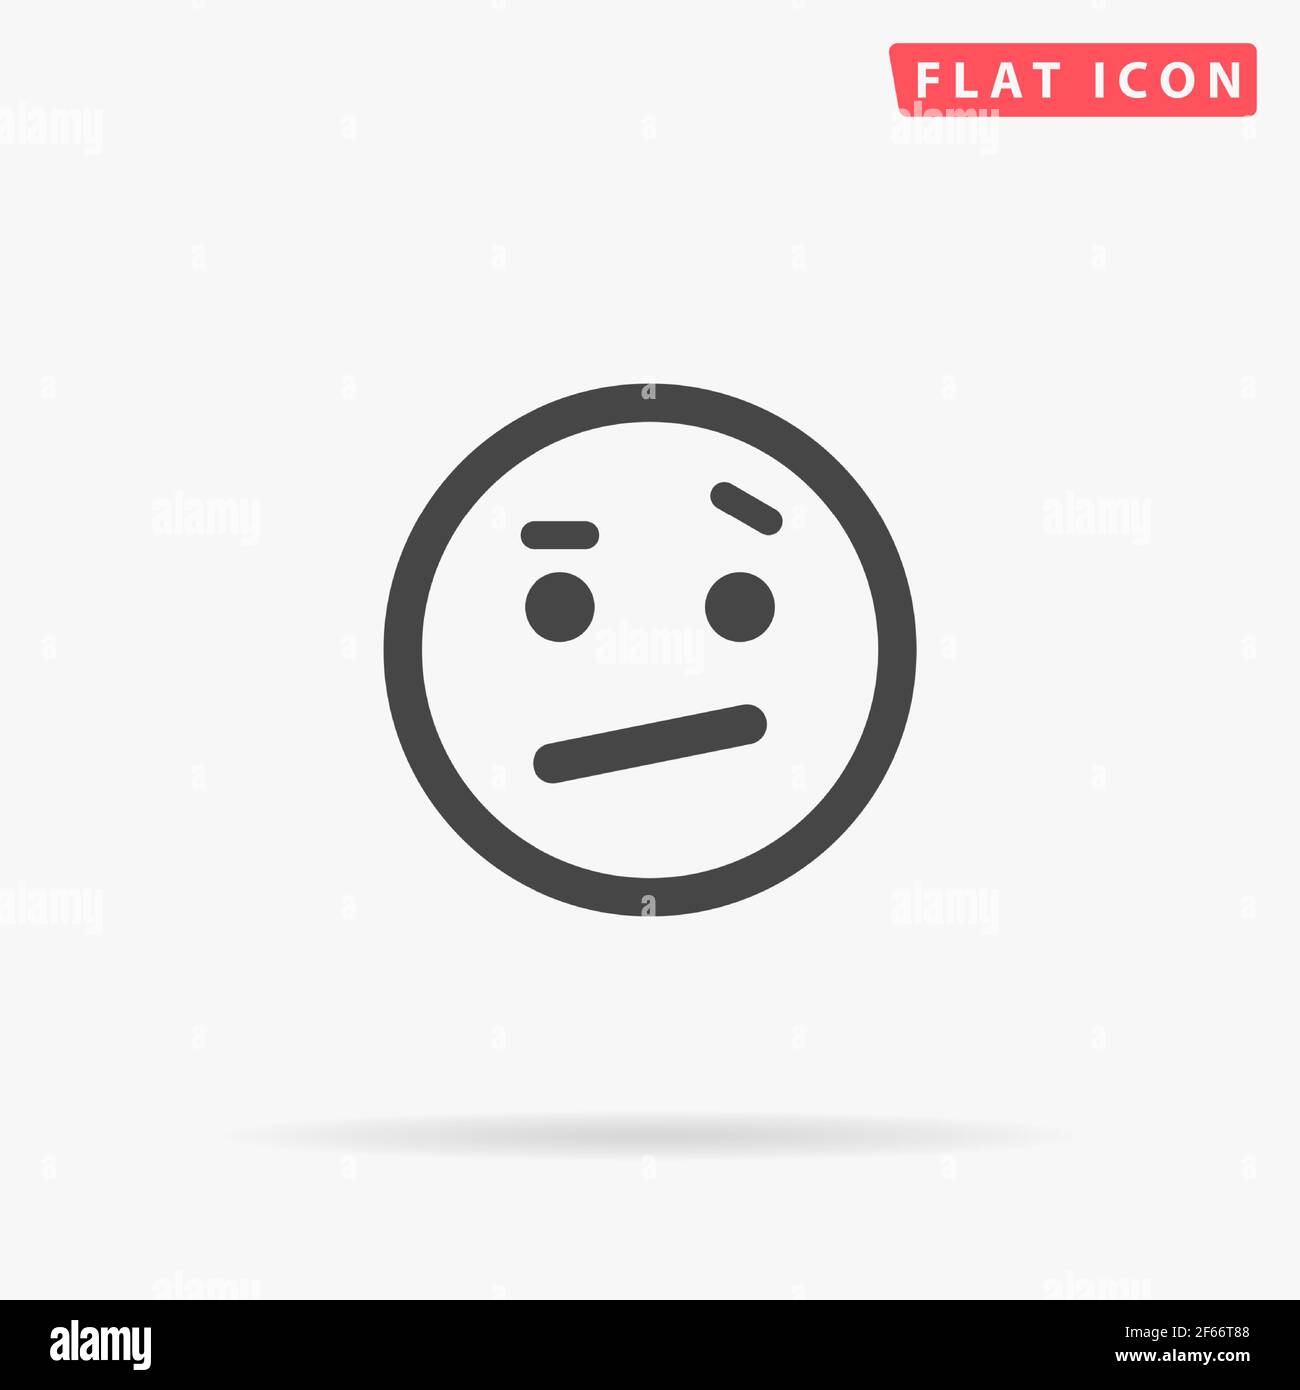 Suspicious Face flat vector icon. Hand drawn style design illustrations. Stock Vector